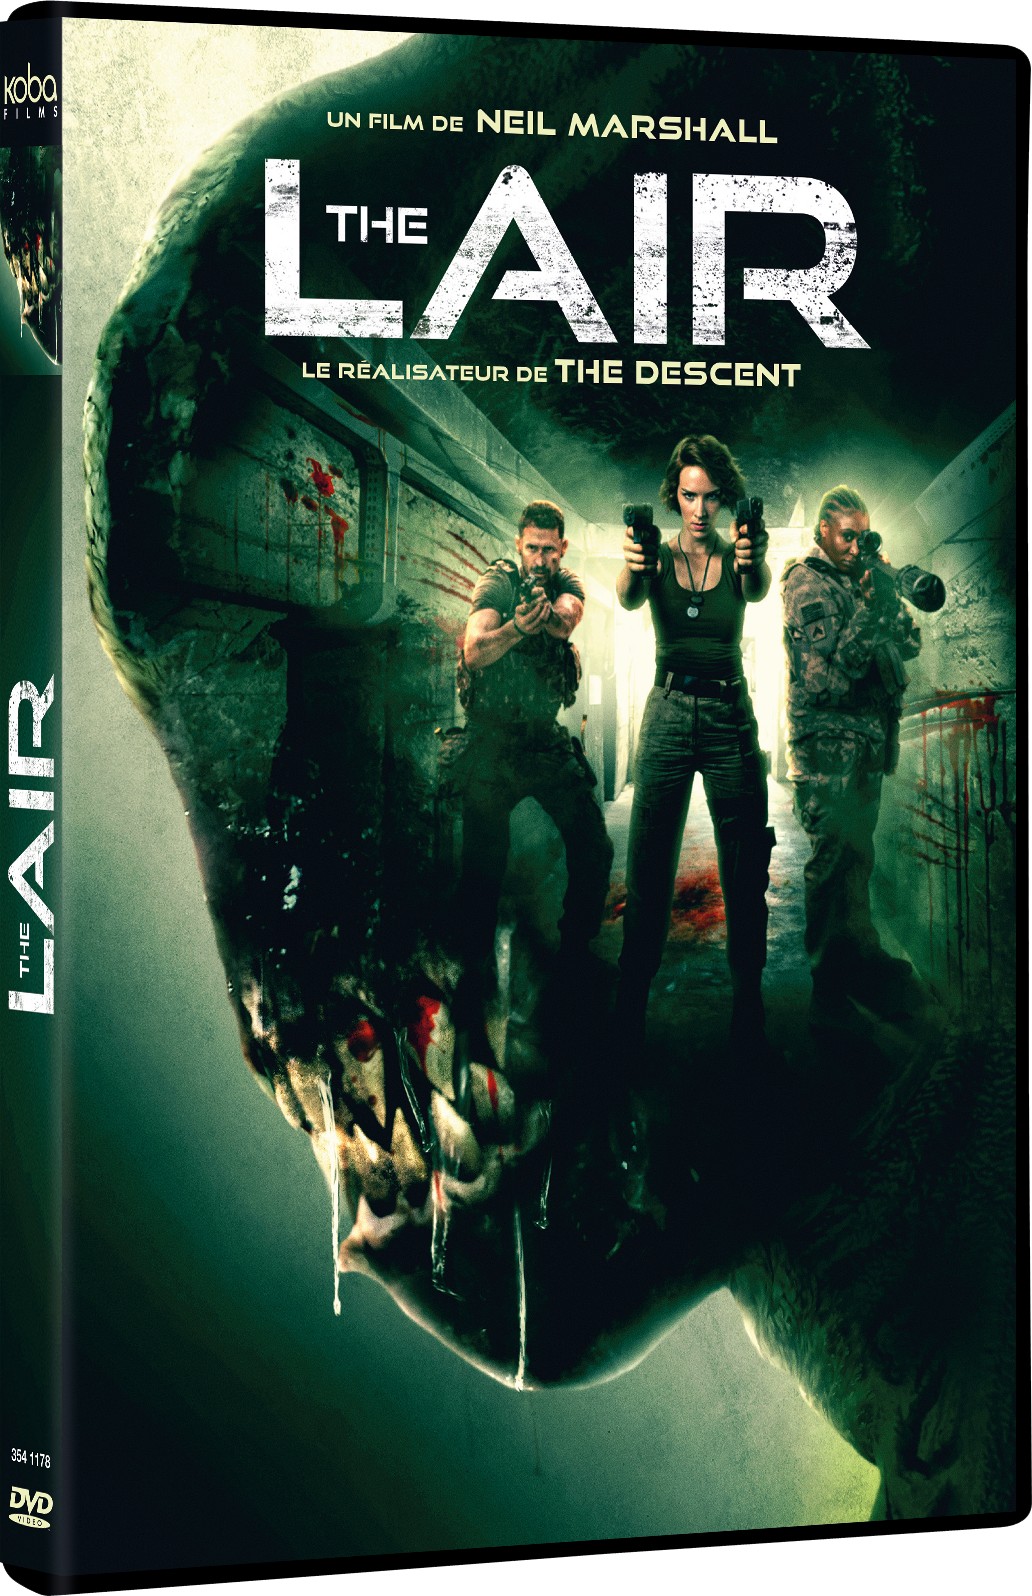 THE LAIR - DVD